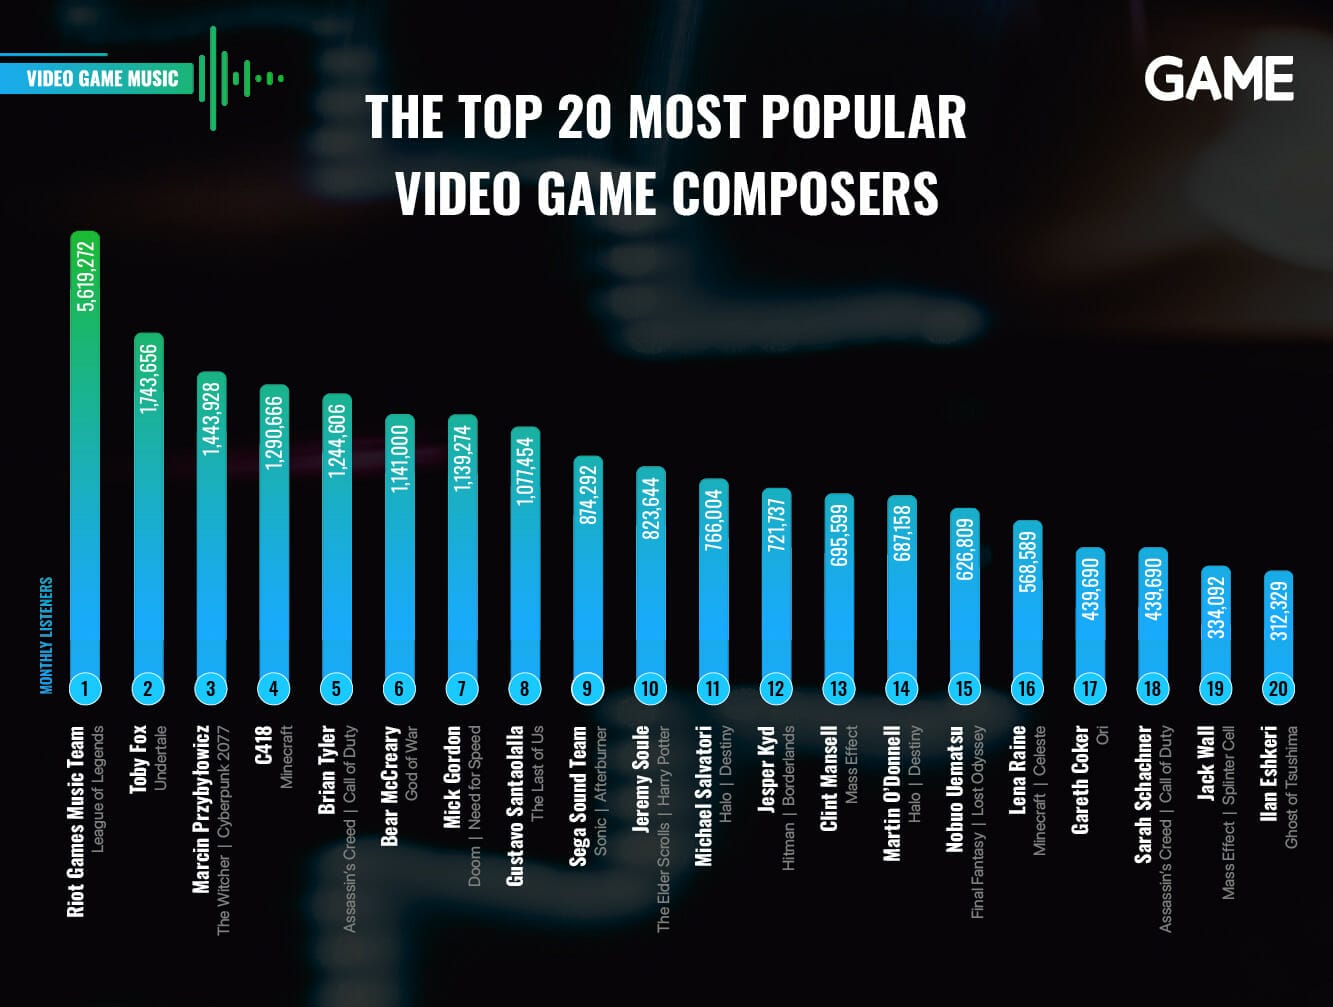 The top 20 most popular video game composers